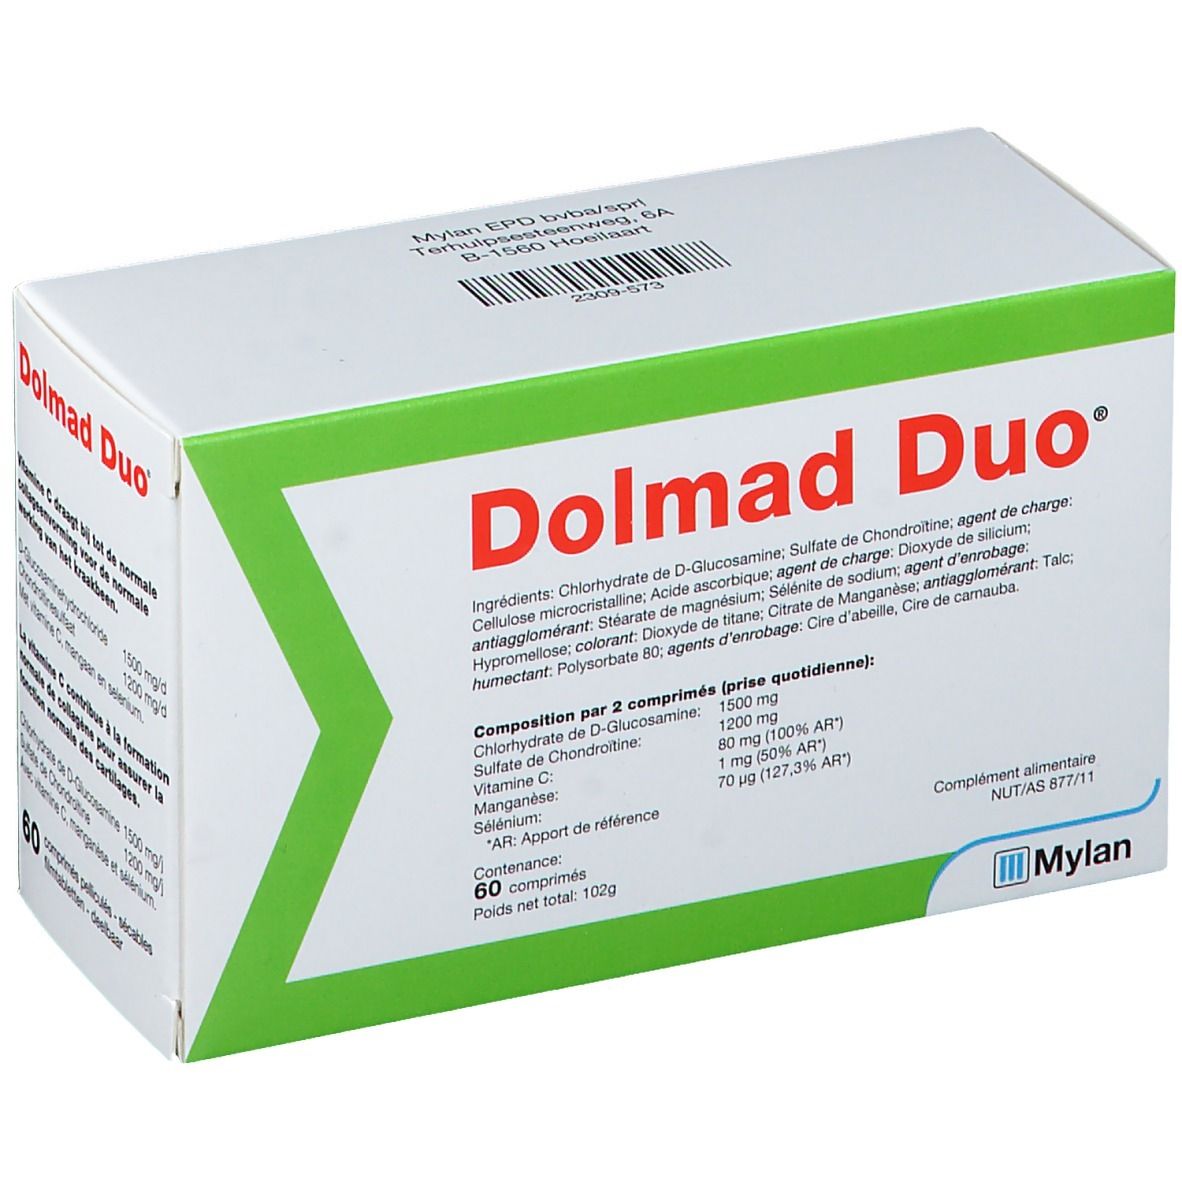 Dolmad Duo®